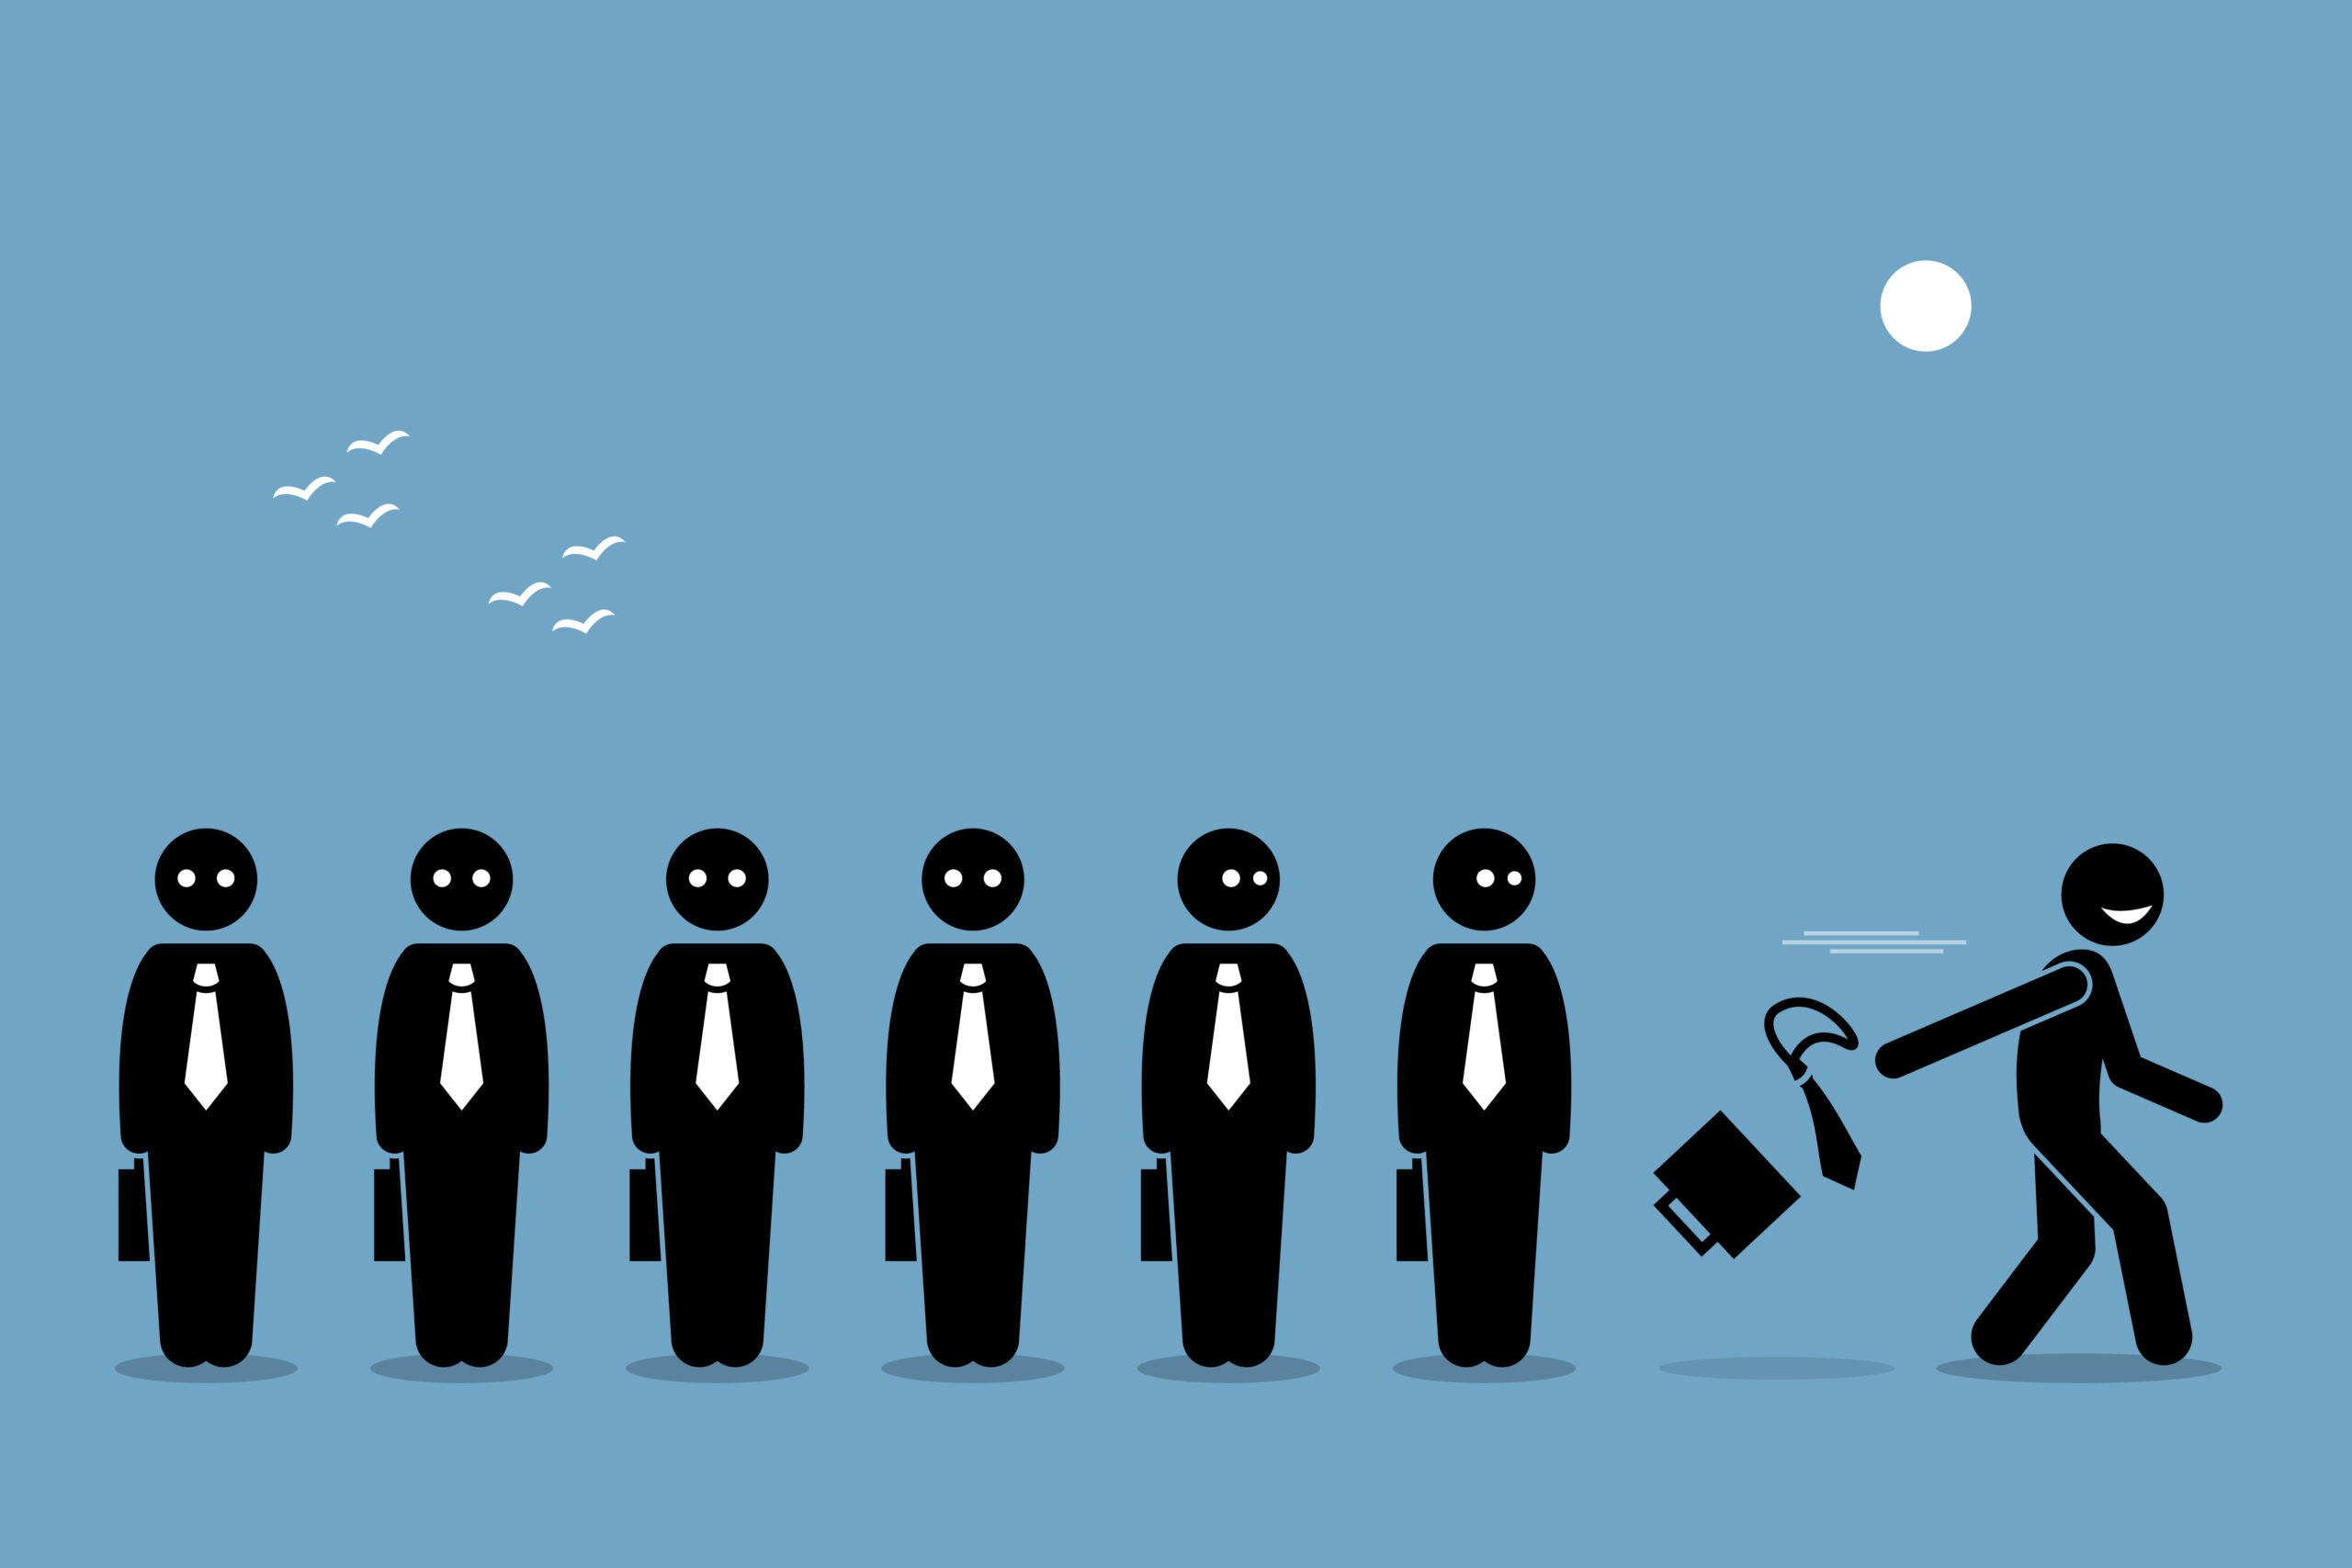 cartoon image of 7 employees, 6 of which are standing in a line side by side, clad all in black but with white ties and all holding briefcases at their sides, save for one smiling employee on the right who is throwing away their tie and briefcase in jubilation at having just quit their job and leaving the all behind him, 2 flocks of seagulls numbering 3 a pair, fly in the distance and white moon is in the sky